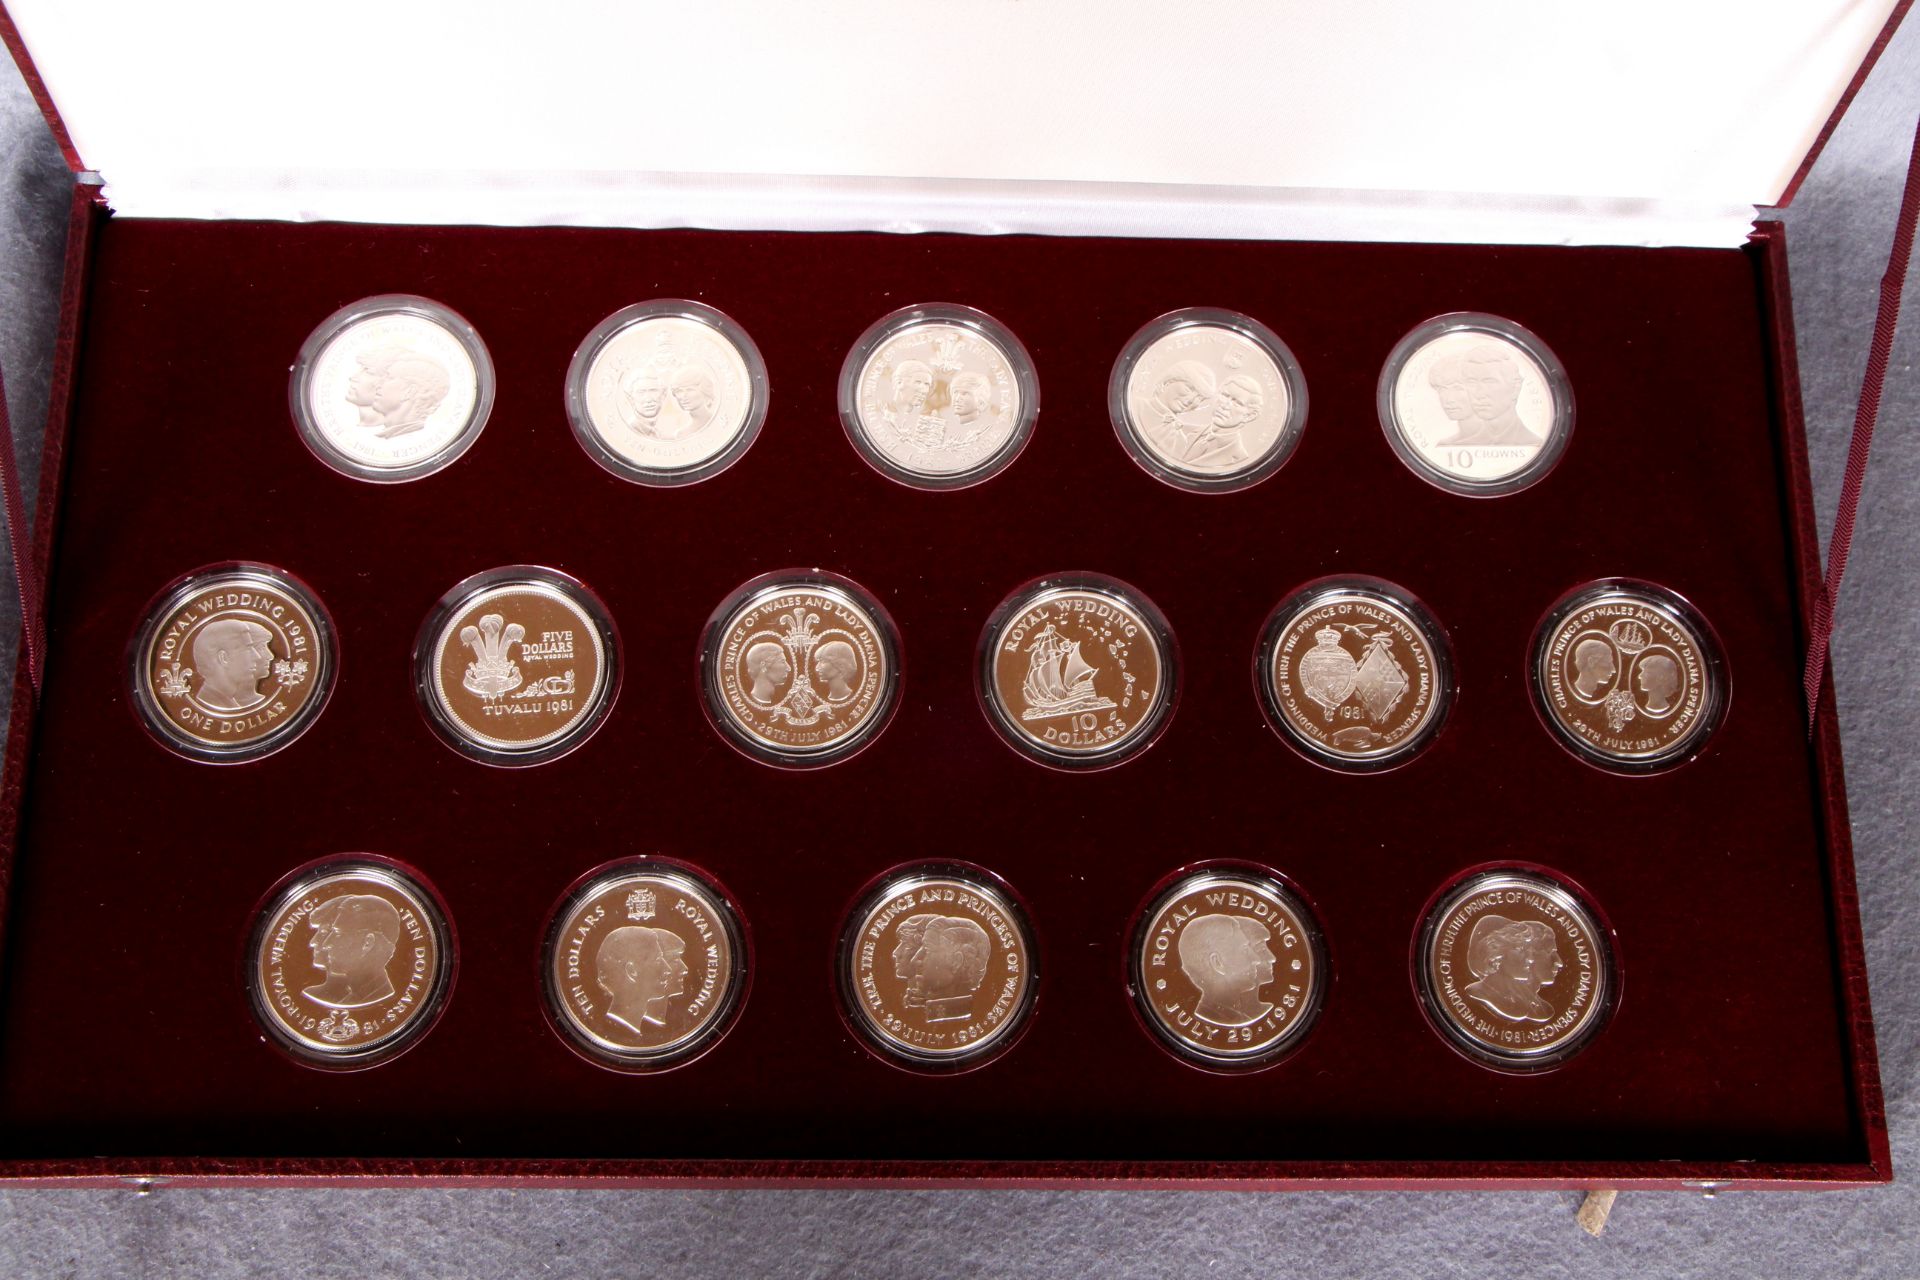 Royal Marriage 1981 of Prince Charles and Lady Diana 16 sterling silver coin collection in original - Image 2 of 2